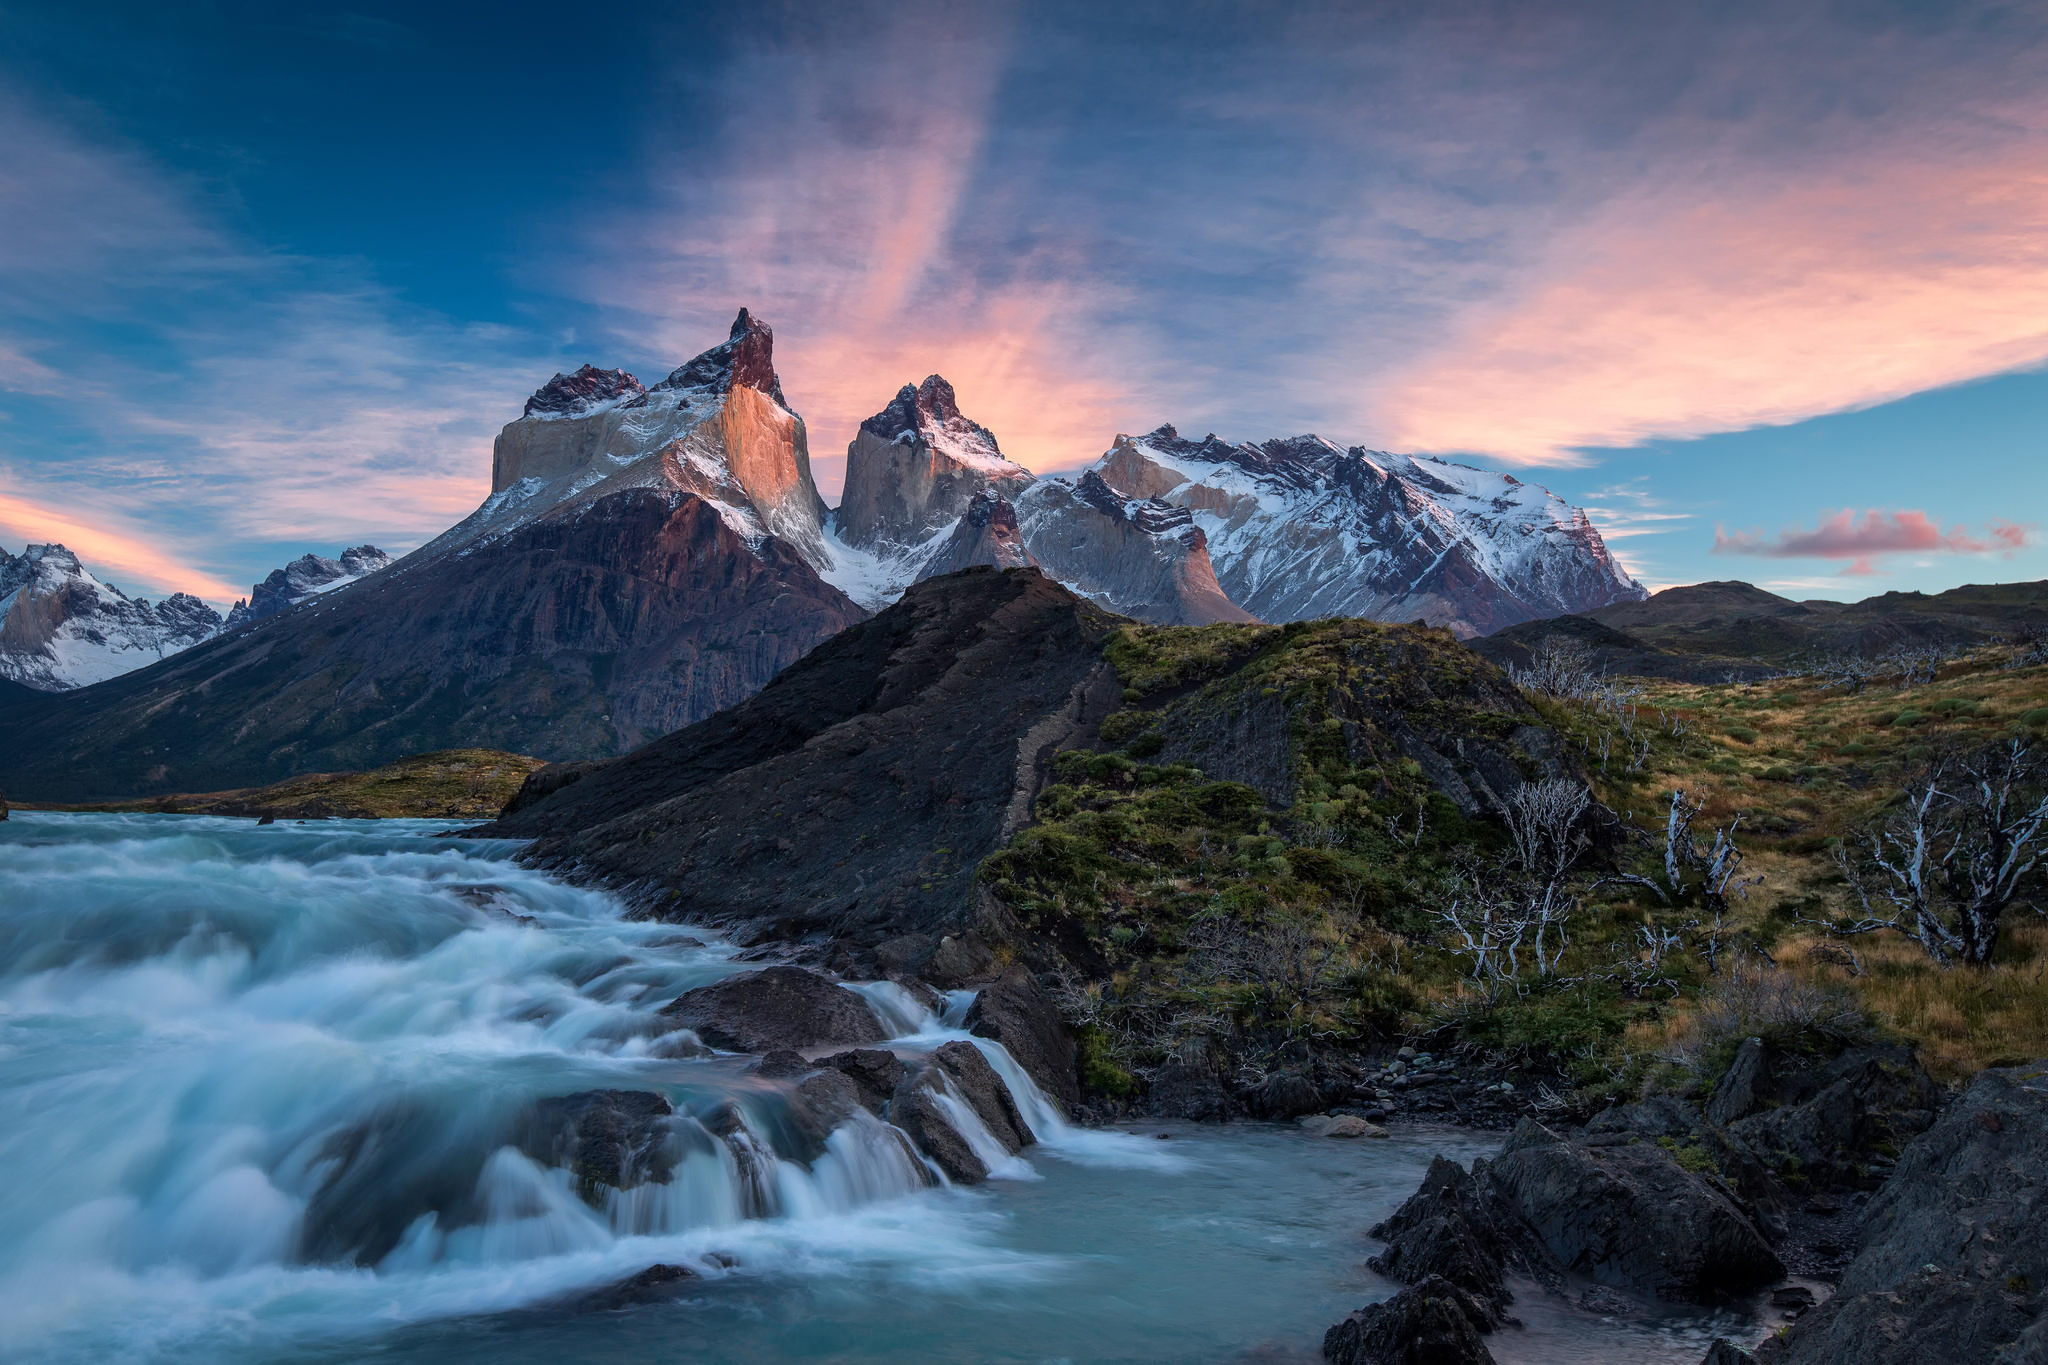 Torres del Paine, Chile Patagonia National Park wallpapers and images ...